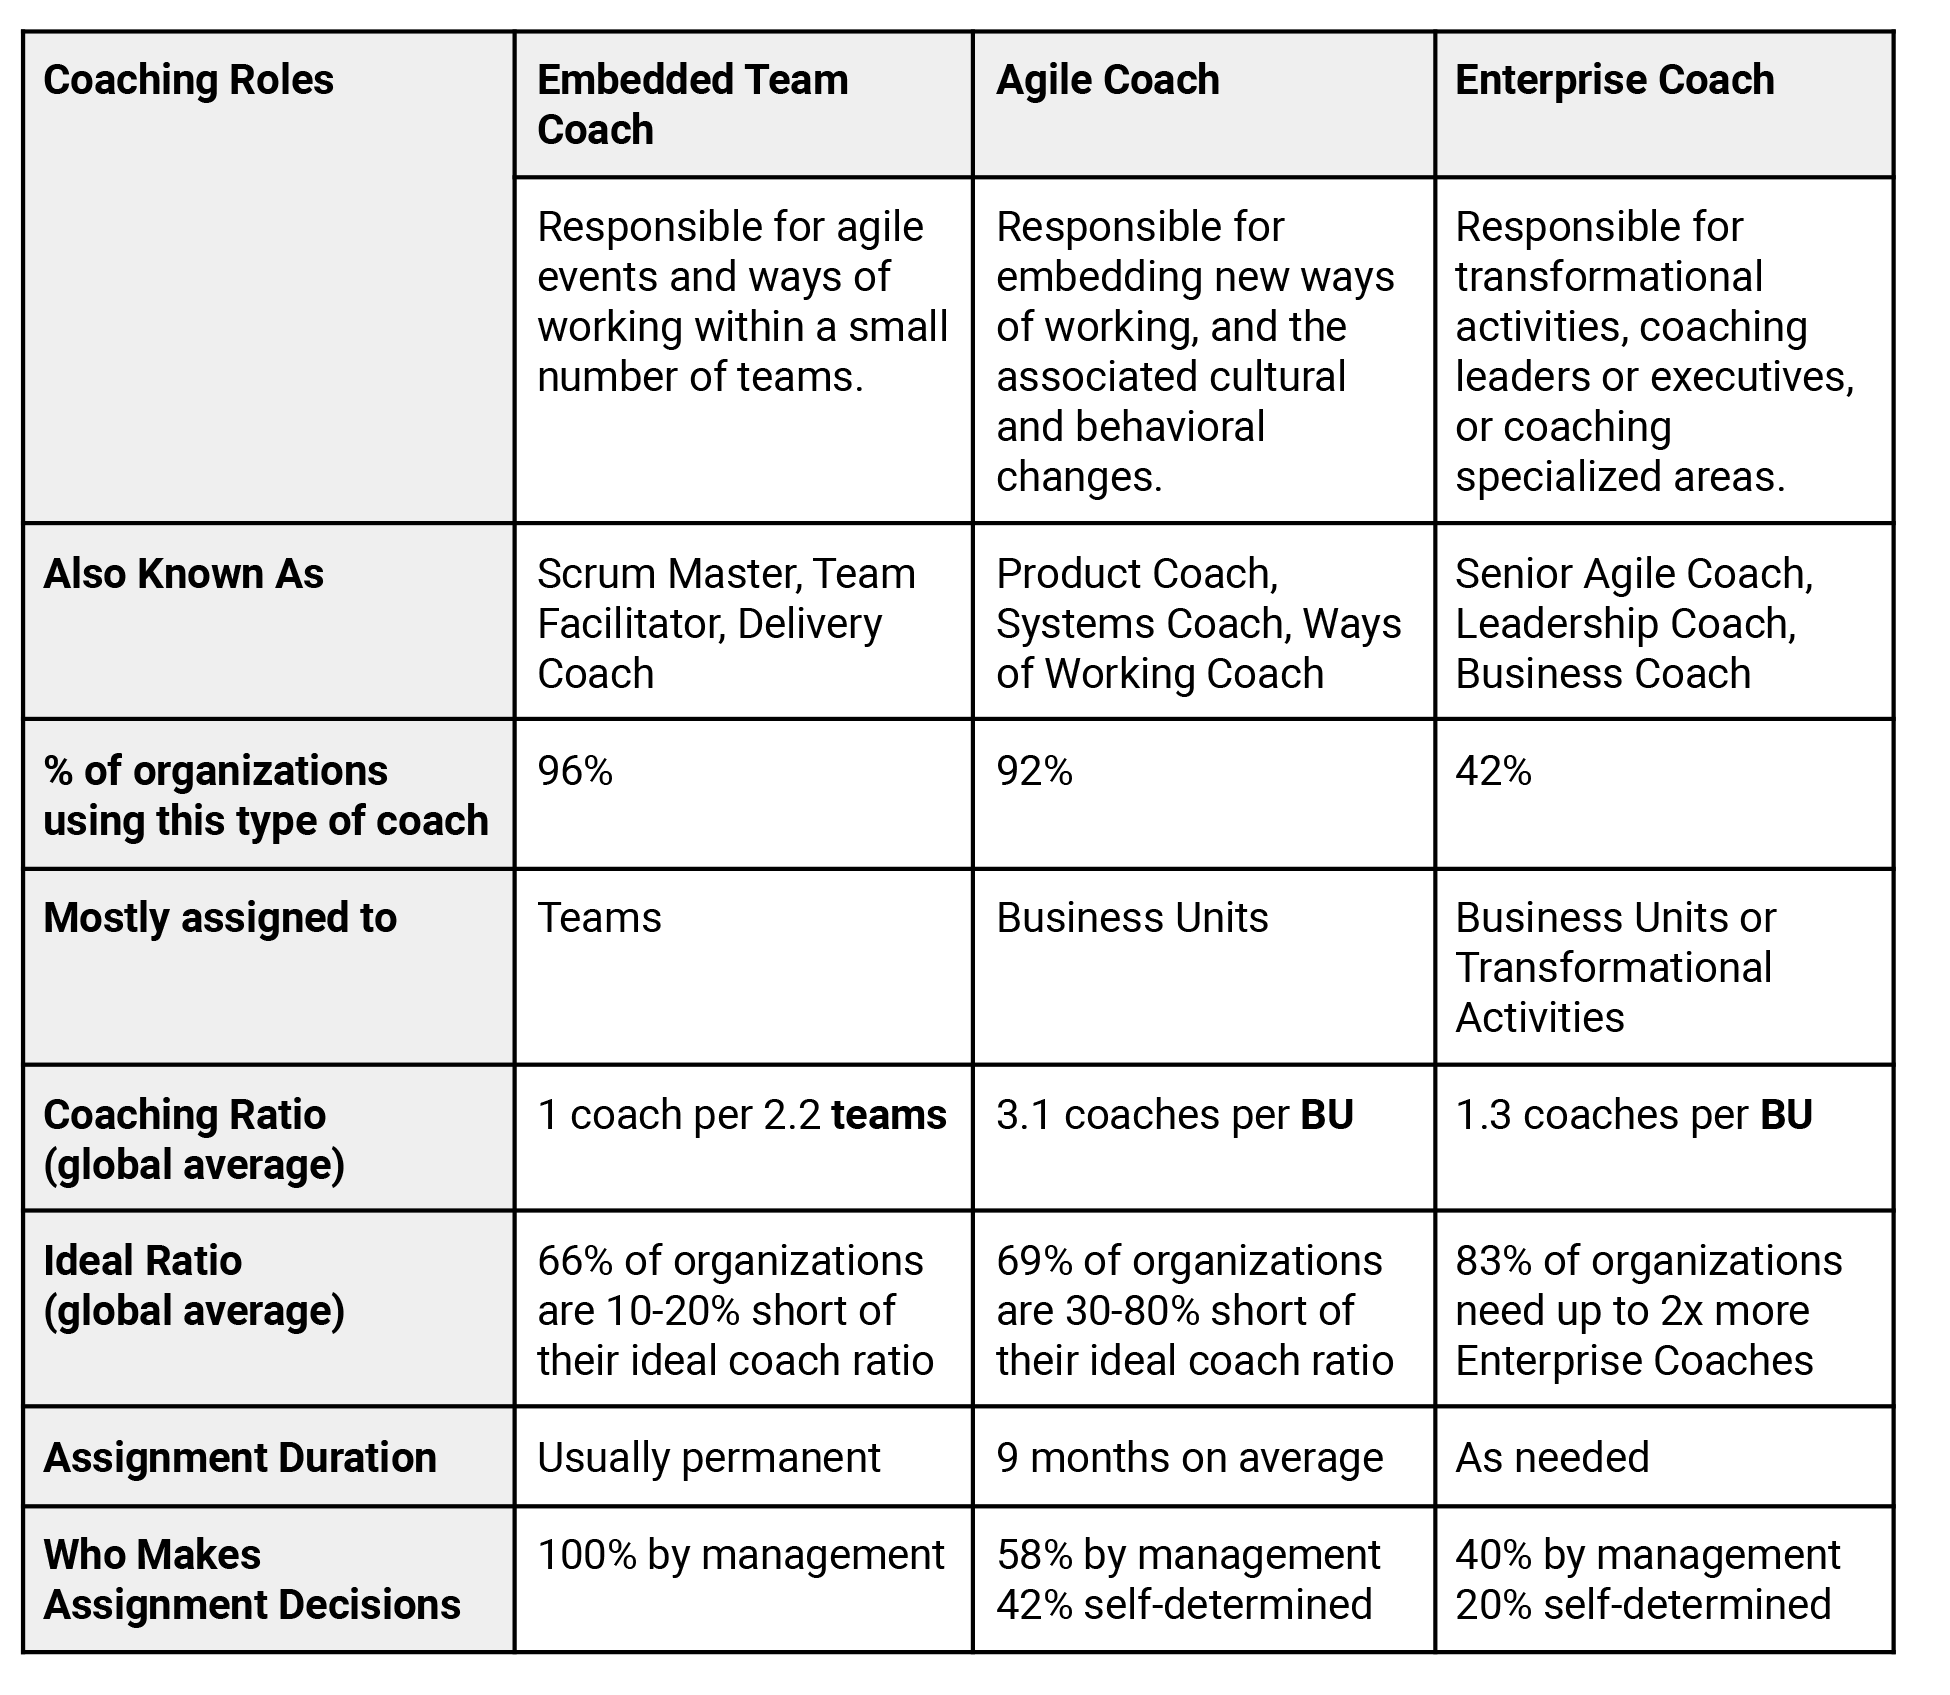 summary of coaching roles table